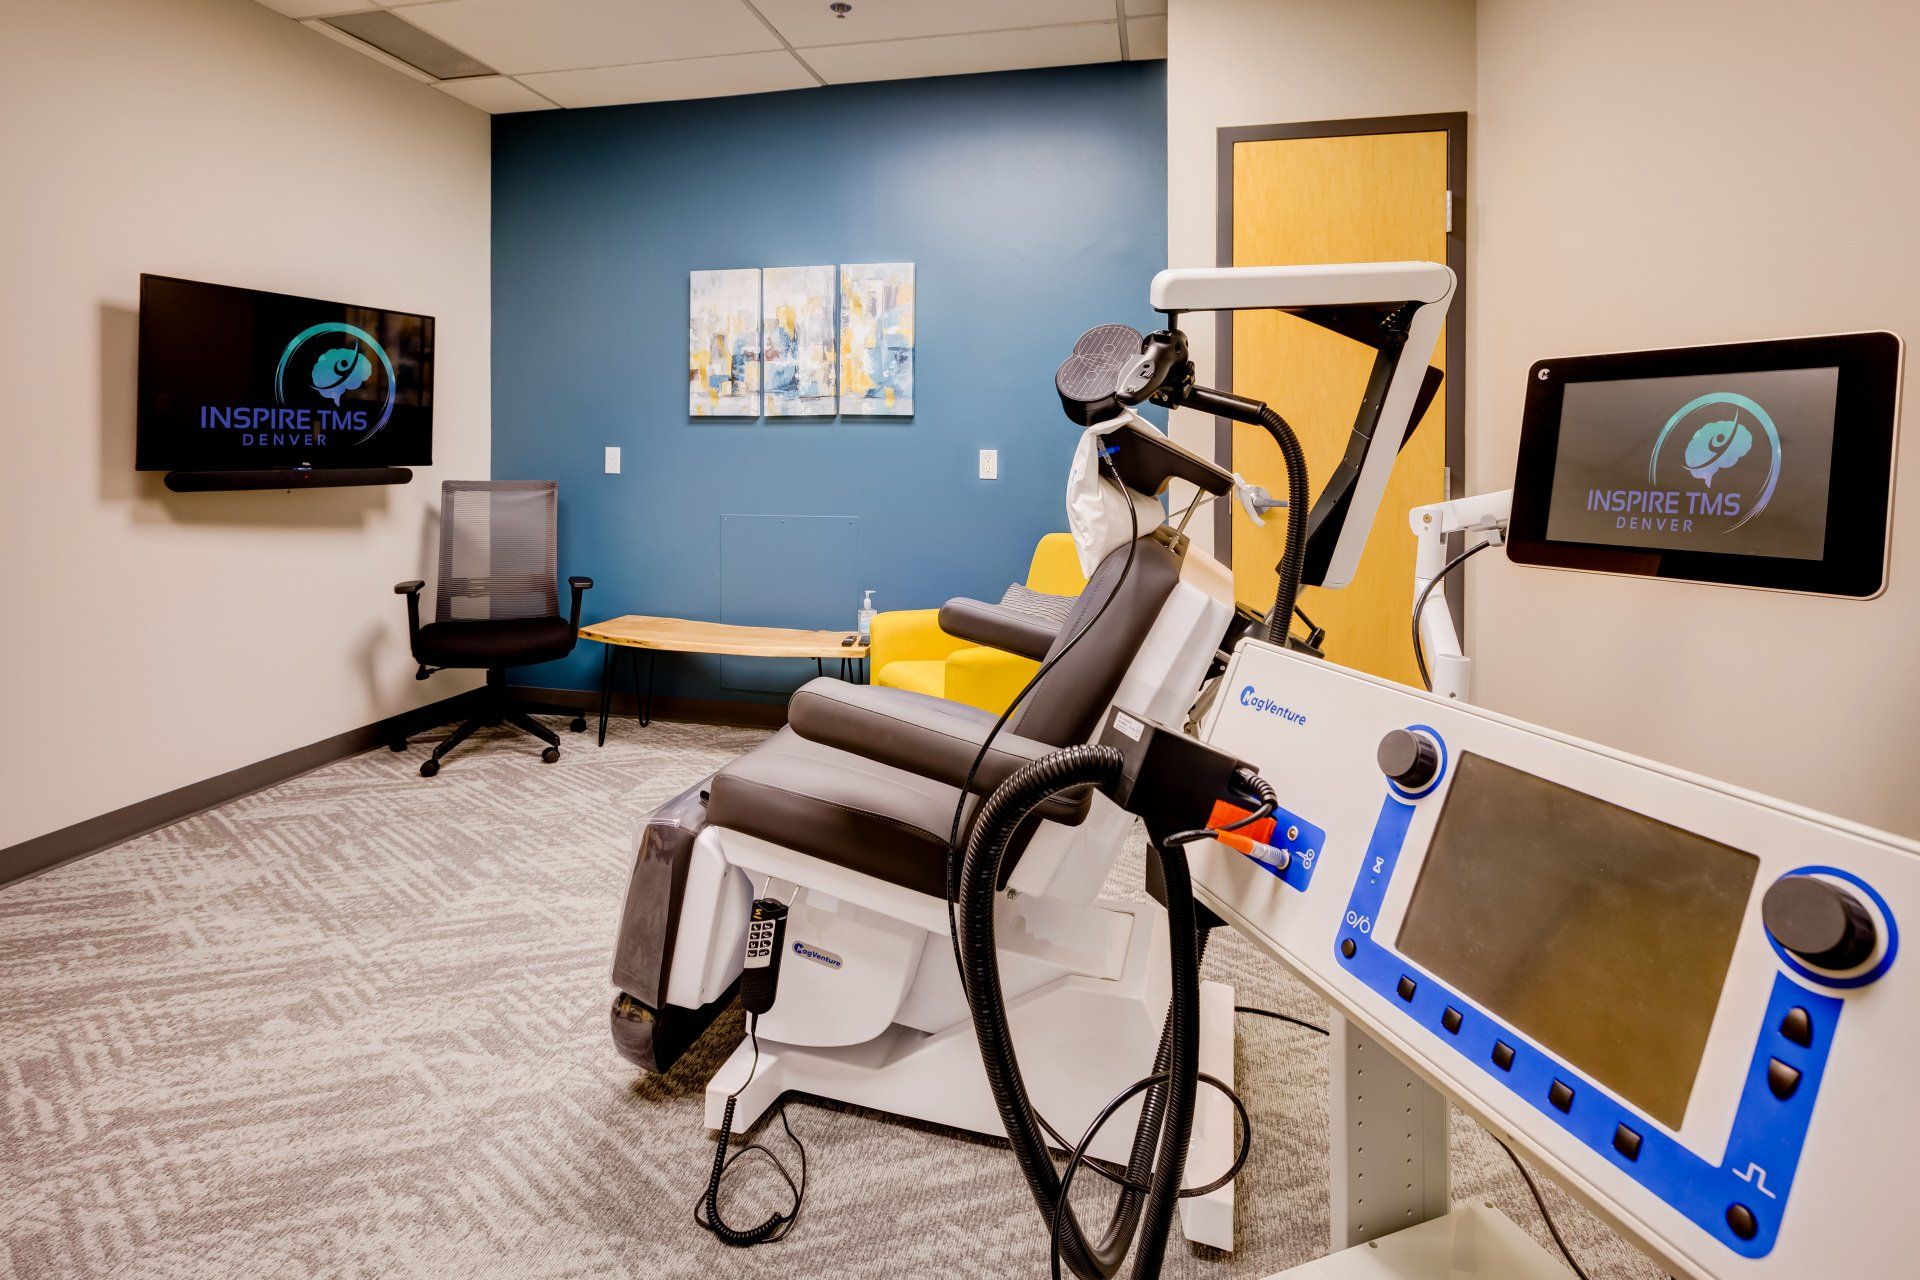 TMS treatment chair in a room with television and additional seating.